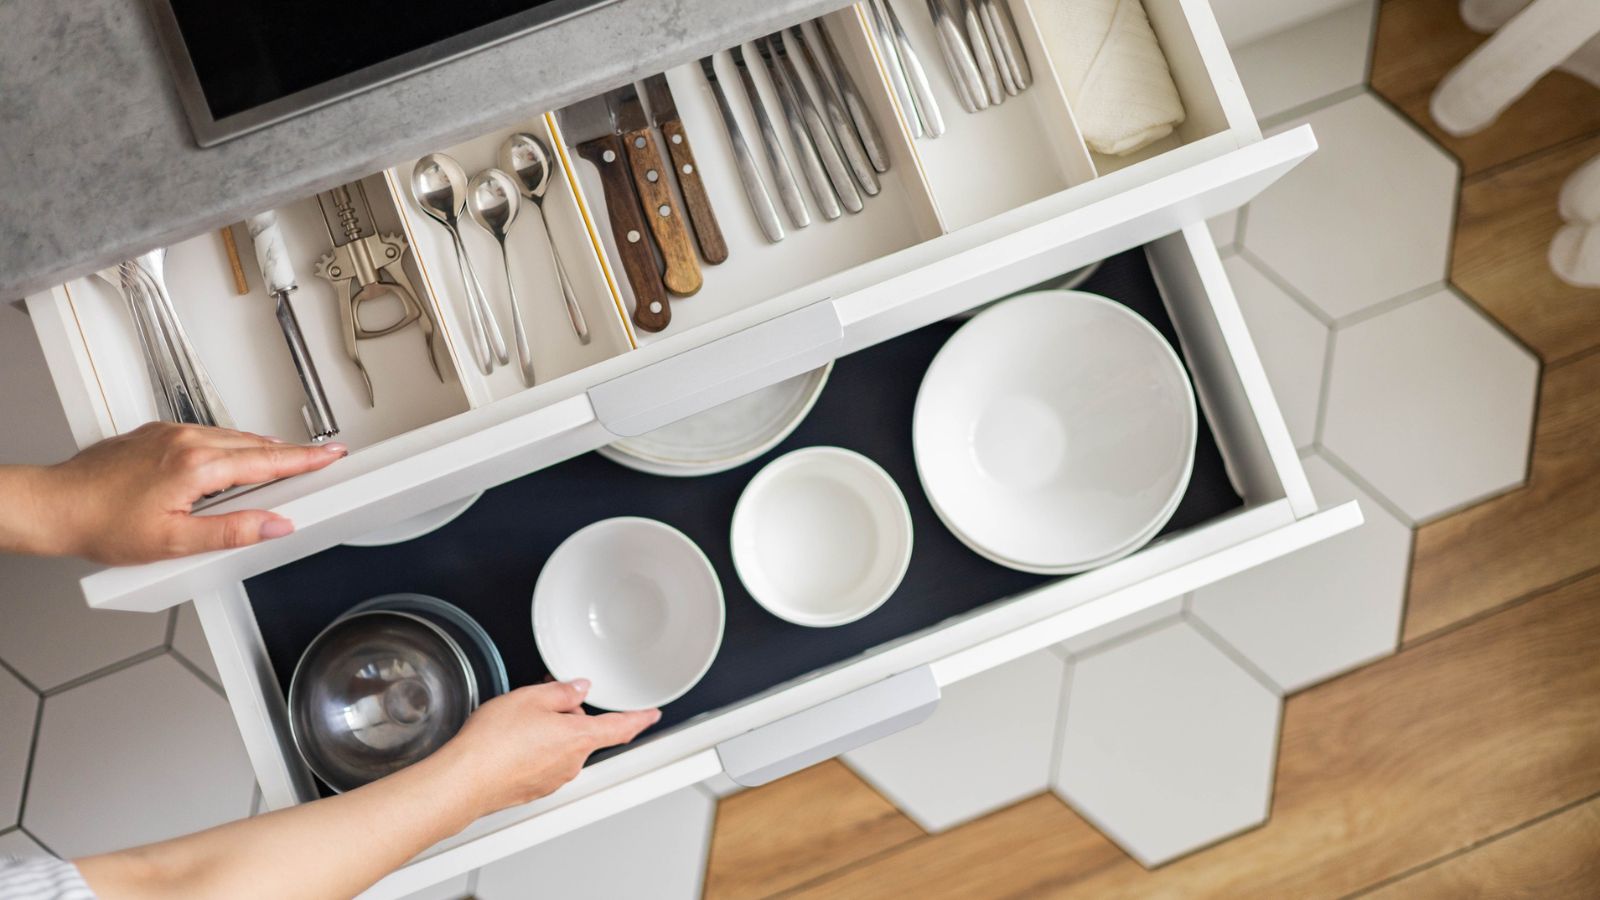 How to organize plates in a kitchen: 10 tips from the experts